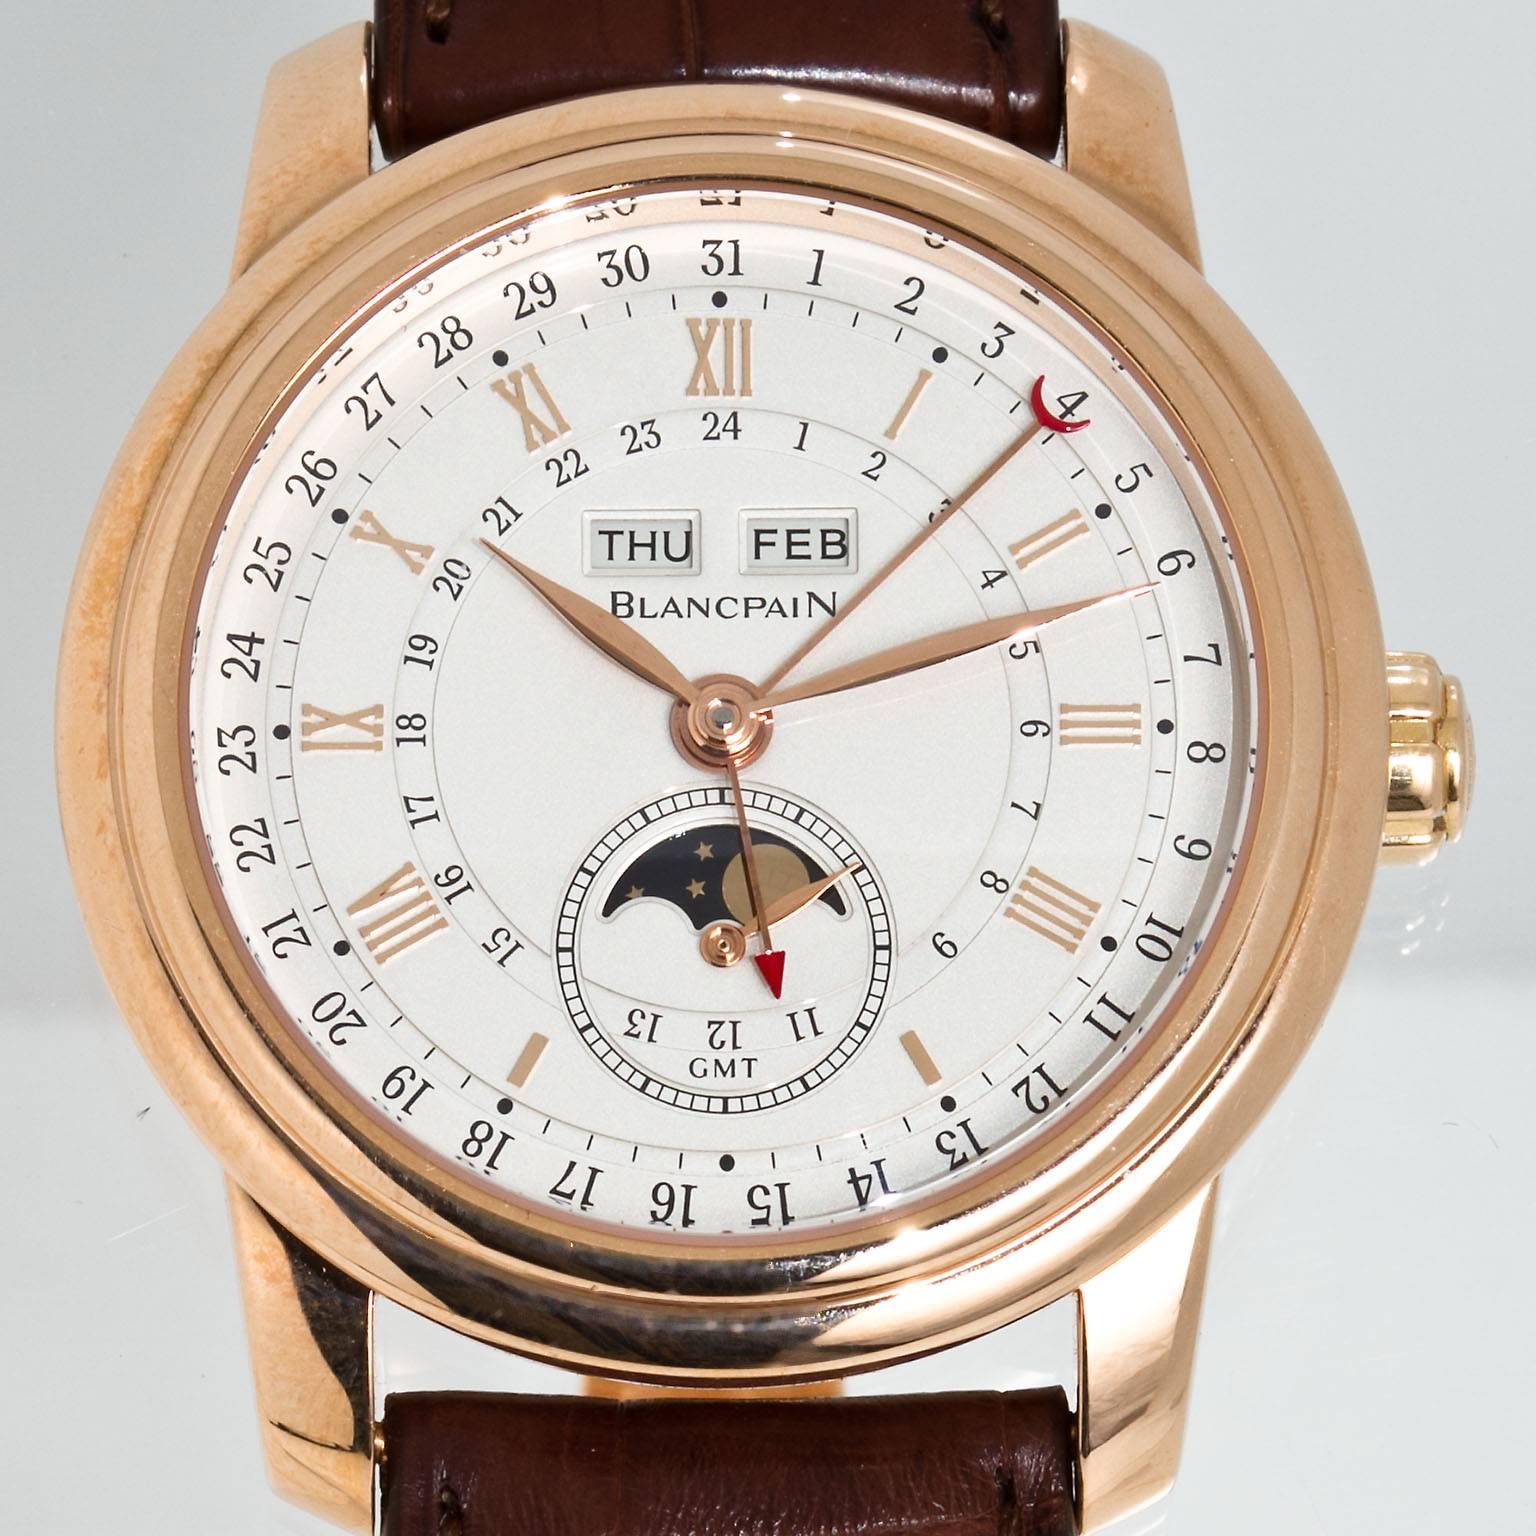 A Blancpain Le Brassus Complete Calendar GMT watch, round 18kt rose gold case (42mm diameter, 13.3mm thick), strap is brown crocodile leather.  A white opaline dial with 18kt rose gold Roman numerals and hands, complete calendar, GMT, moon phase